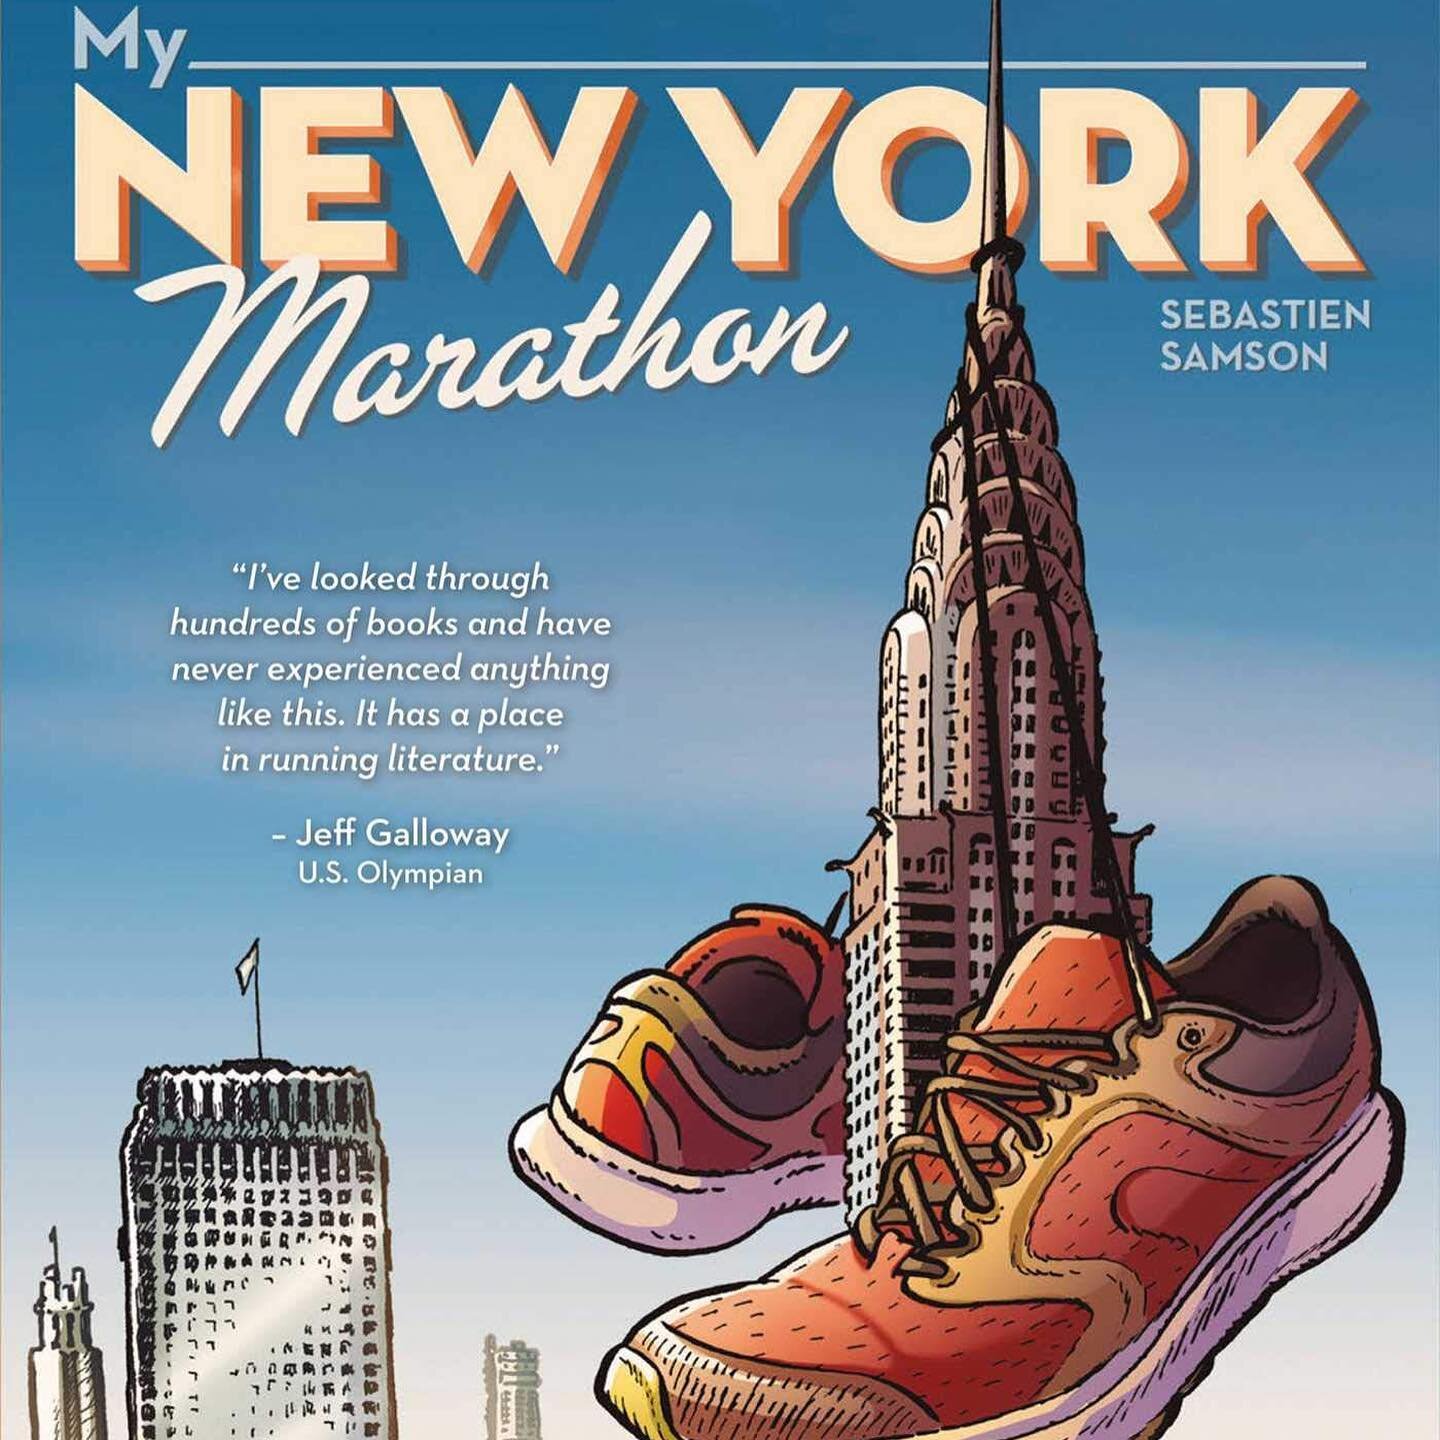 3/3/2019
📖 My New York Marathon by Sebastien Samson
A fun graphic novel about the author&rsquo;s journey from nonrunner (word? Sure!) to NYC Marathon finished.
Samson captures the solitude of training alone, and keeps his humor intact. So many runni